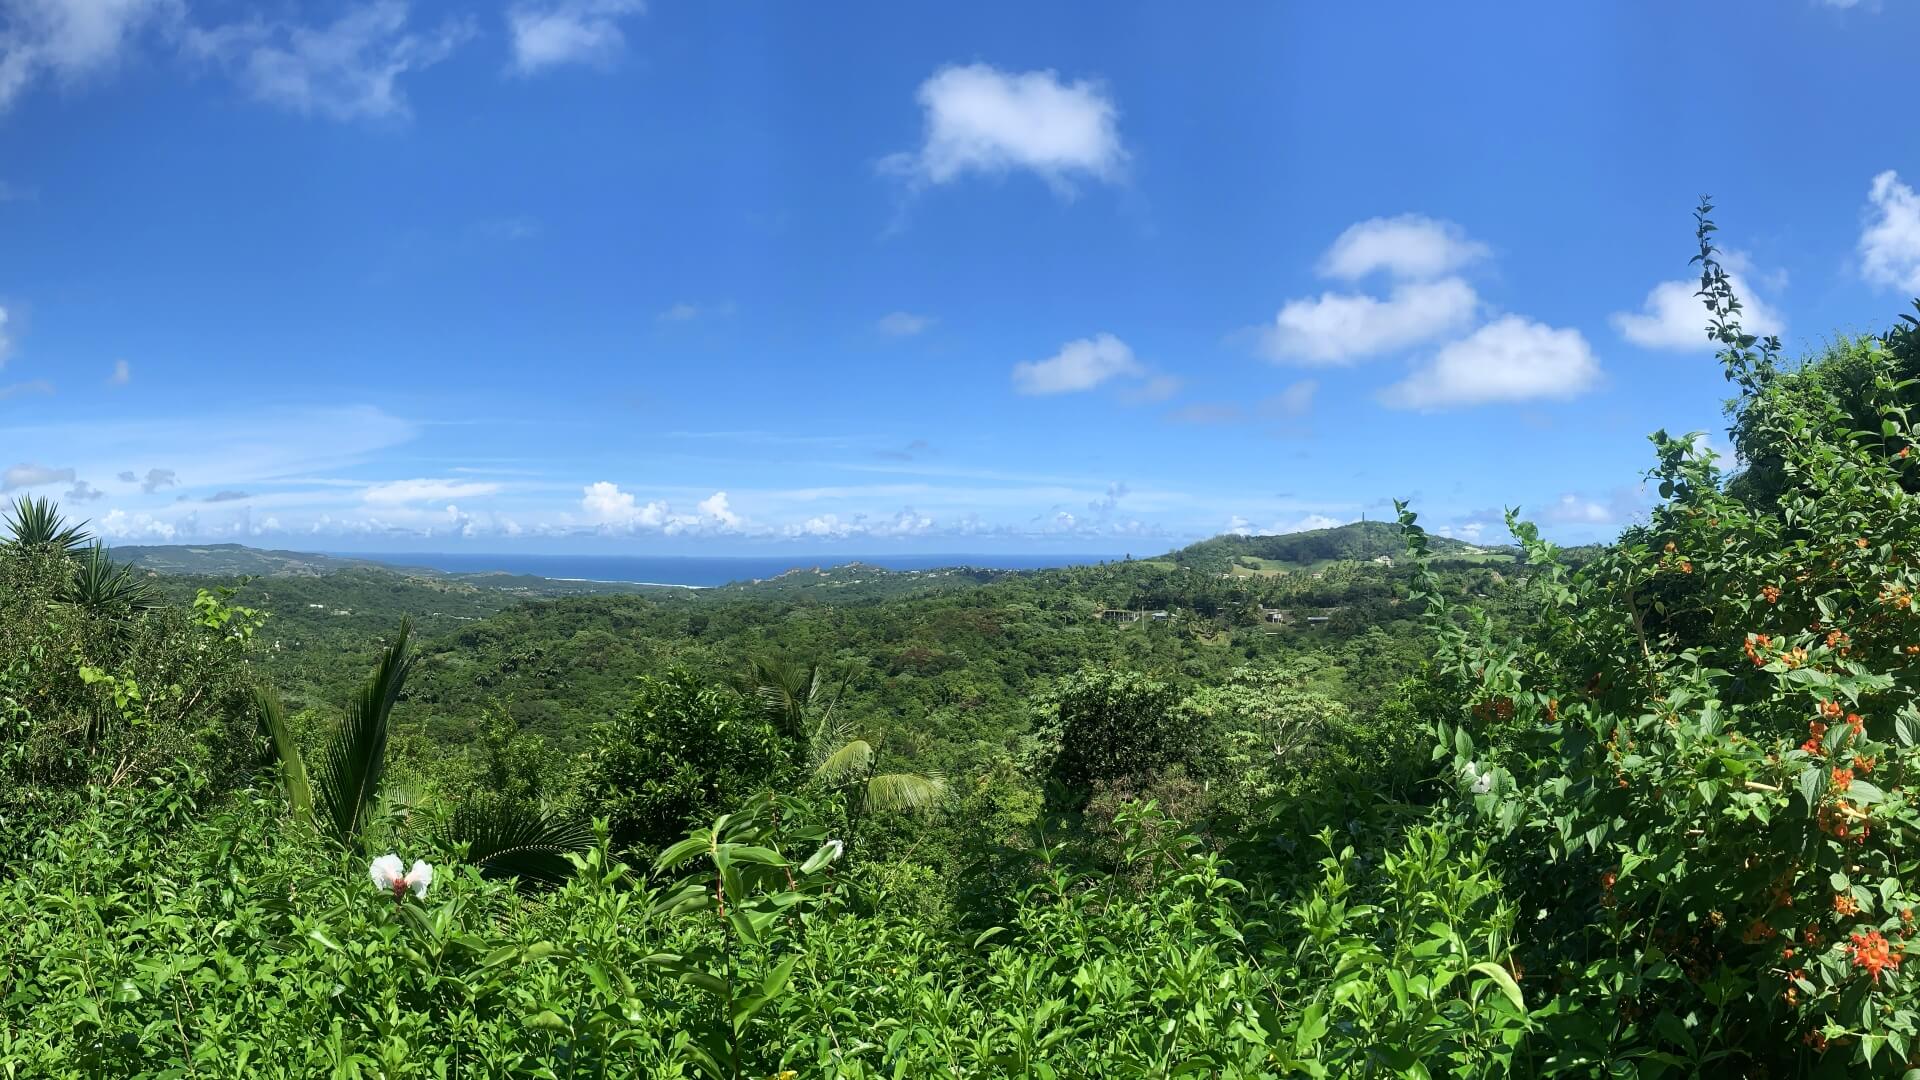 View from Flower Forest overlooking the east coast of Barbados